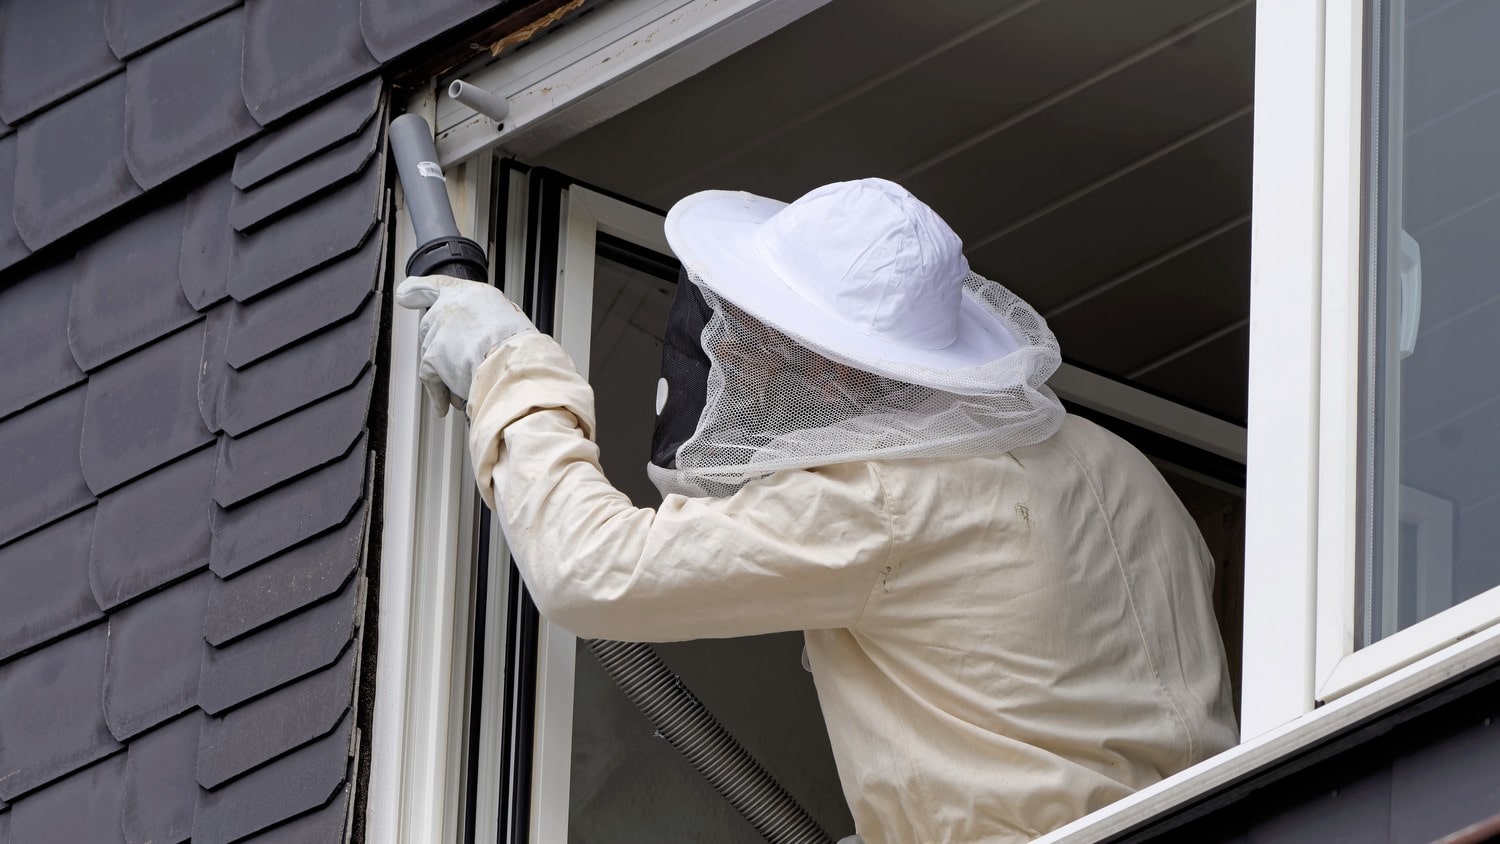 A close-up photo of a wasp nest being removed, with a person wearing protective gear and using a tool to safely remove it.